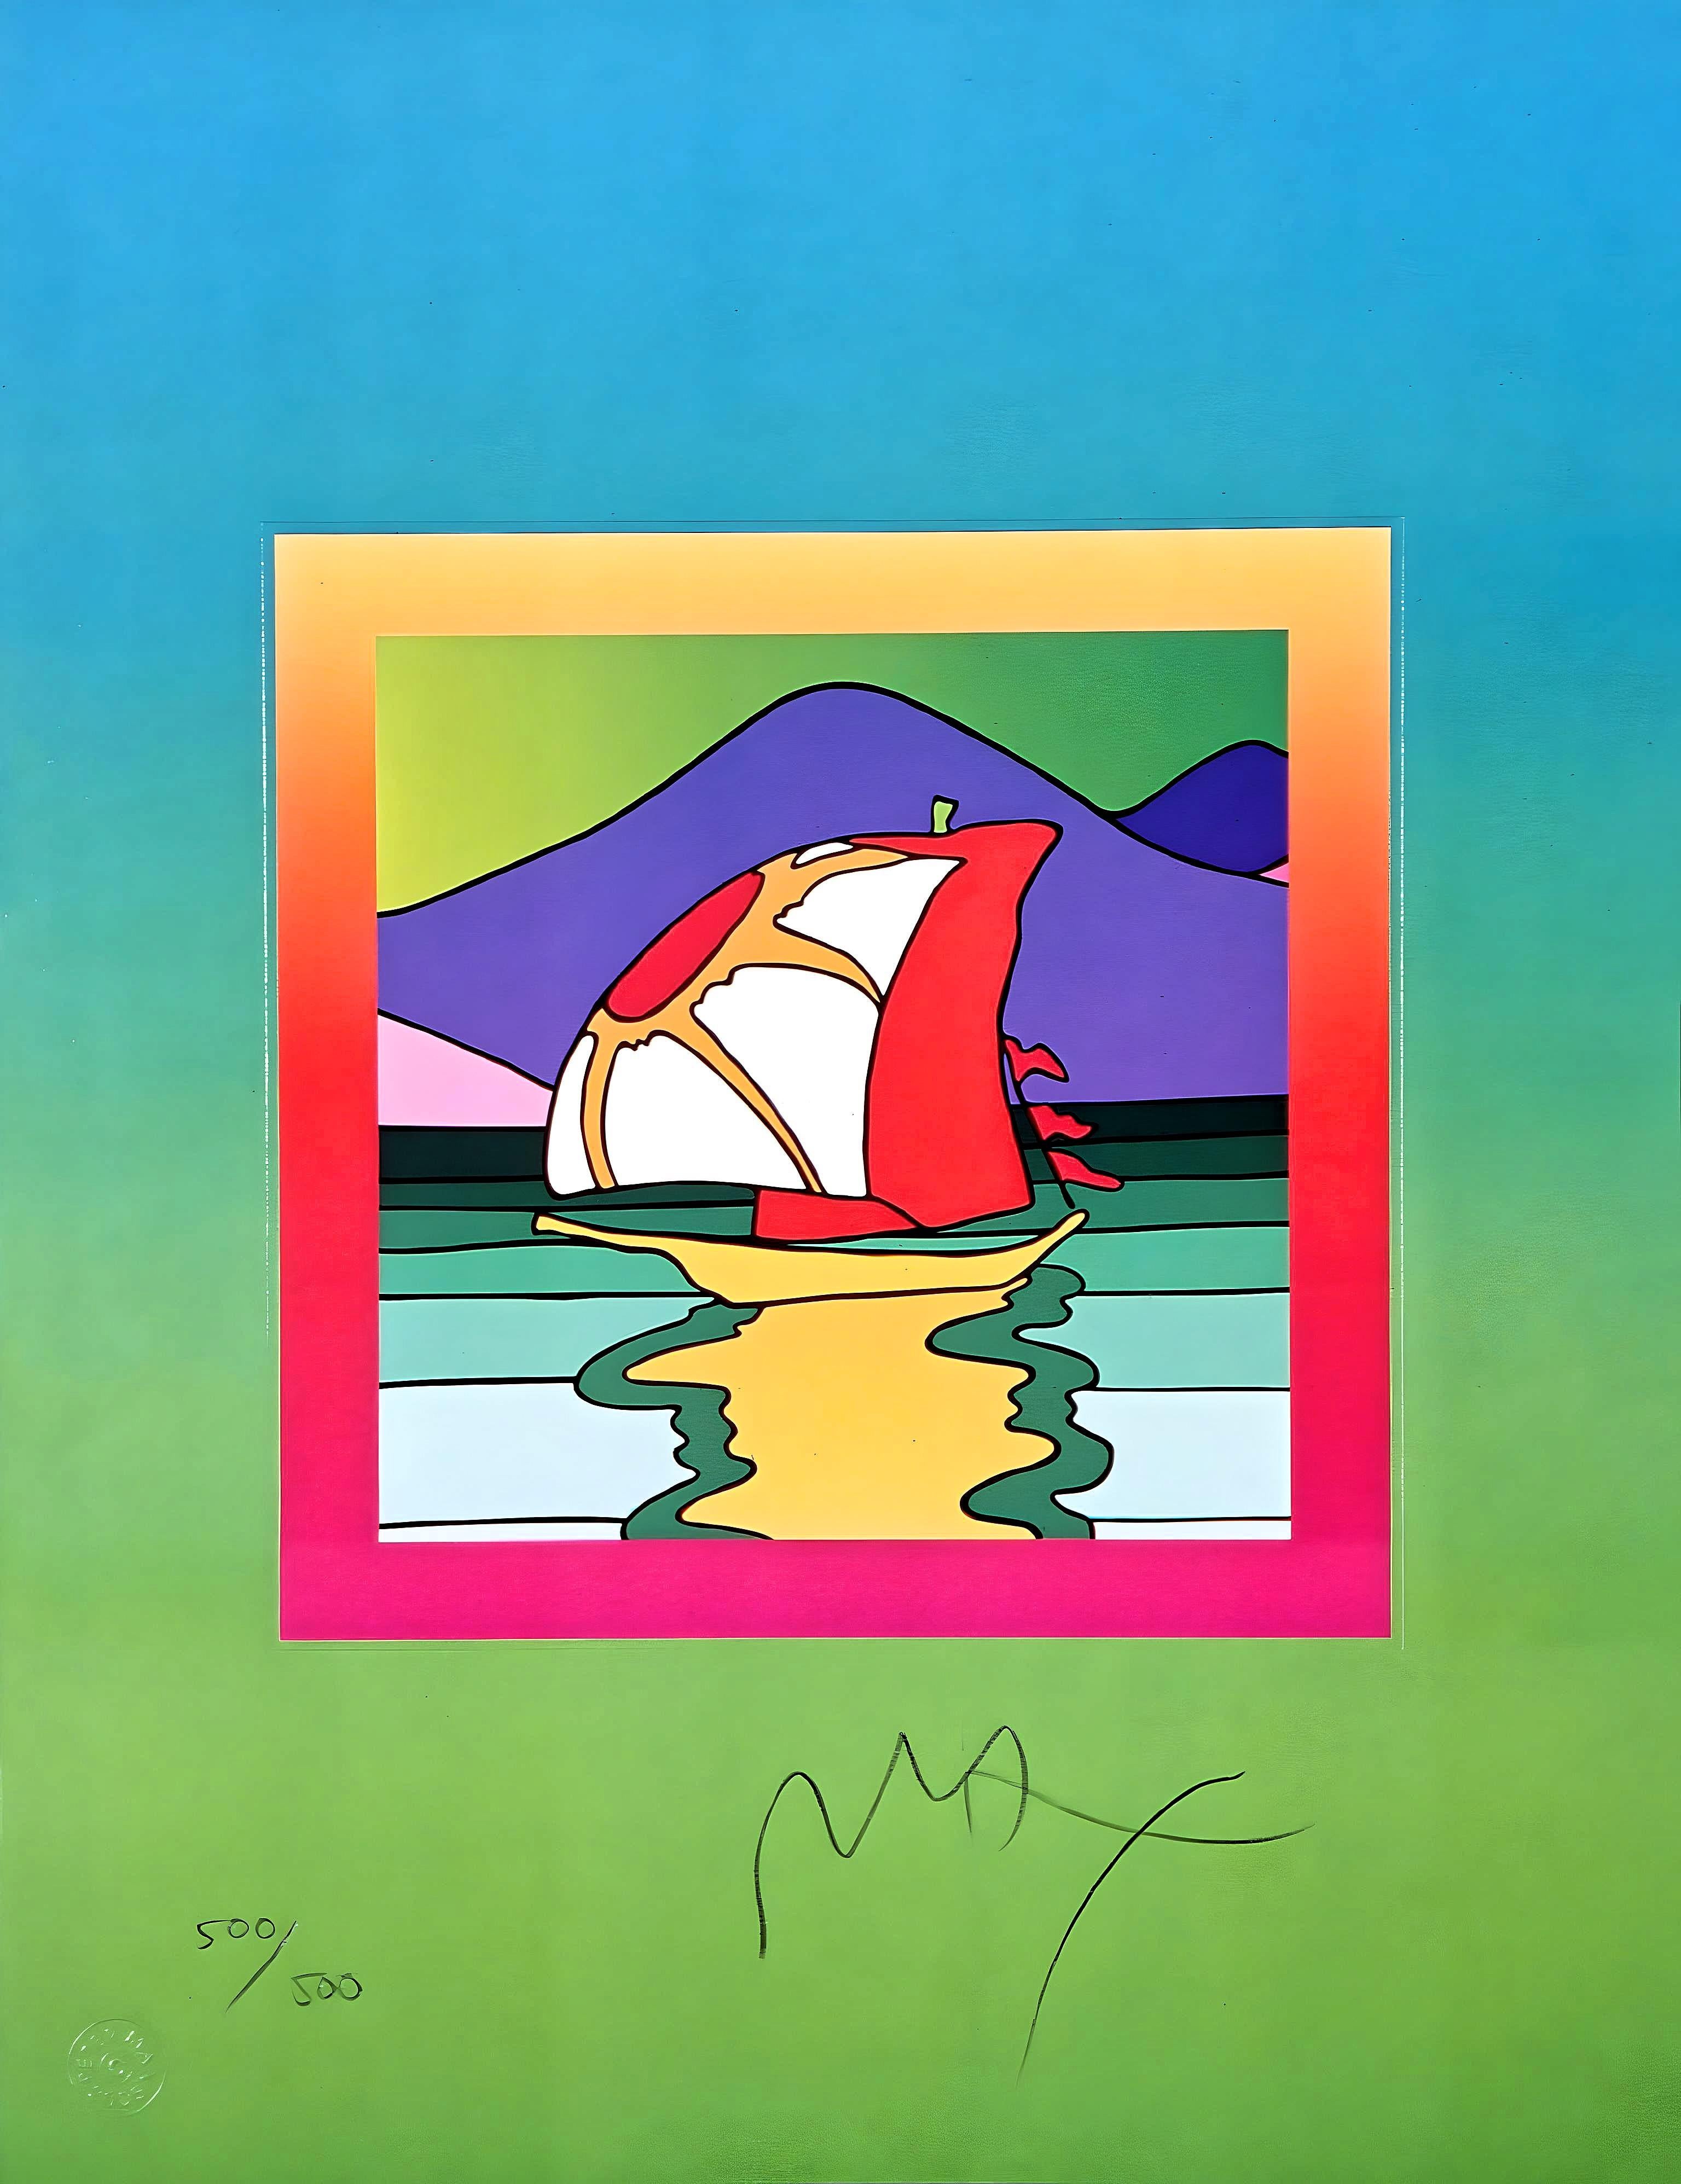 Artist: Peter Max (1937)
Title: Sailboat East on Blends
Year: 2005
Edition: 500/500, plus proofs
Medium: Lithograph on Lustro Saxony paper
Size: 17 x 13 inches
Condition: Excellent
Inscription: Signed and numbered by the artist
Notes: Published by